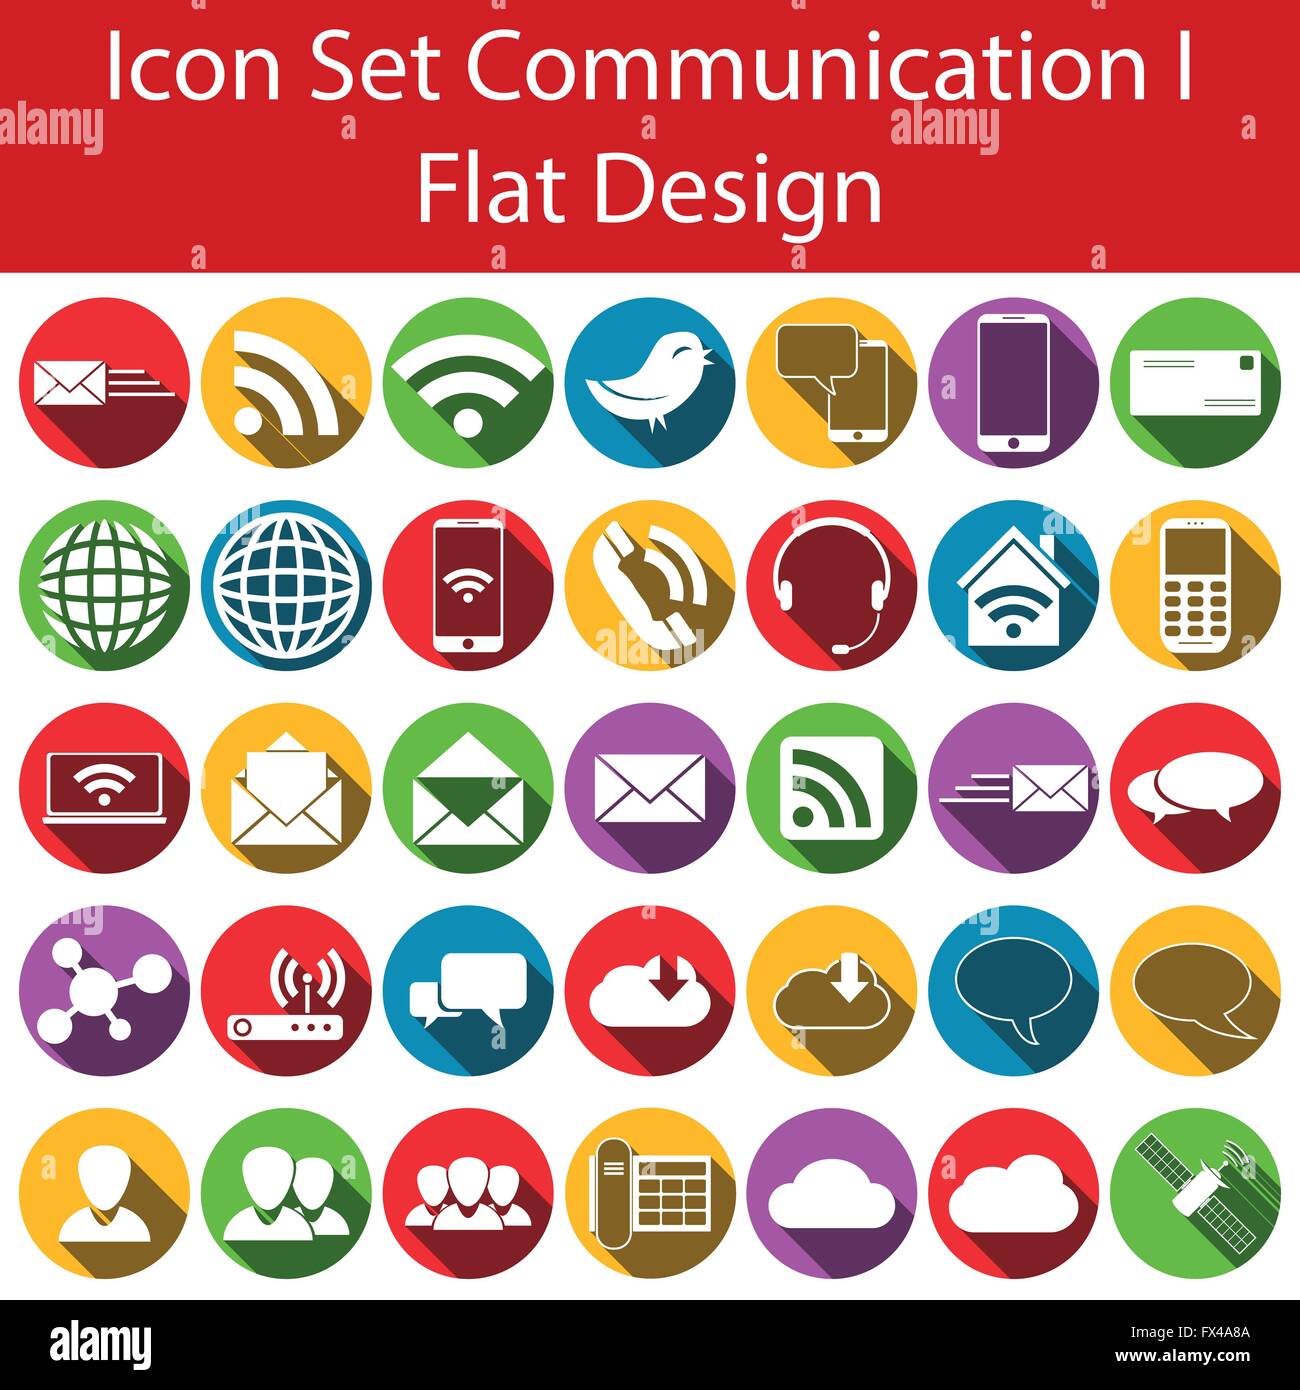 Flat Design Icon Set Communication I with 35 icons for the creative use in web an graphic design Stock Vector